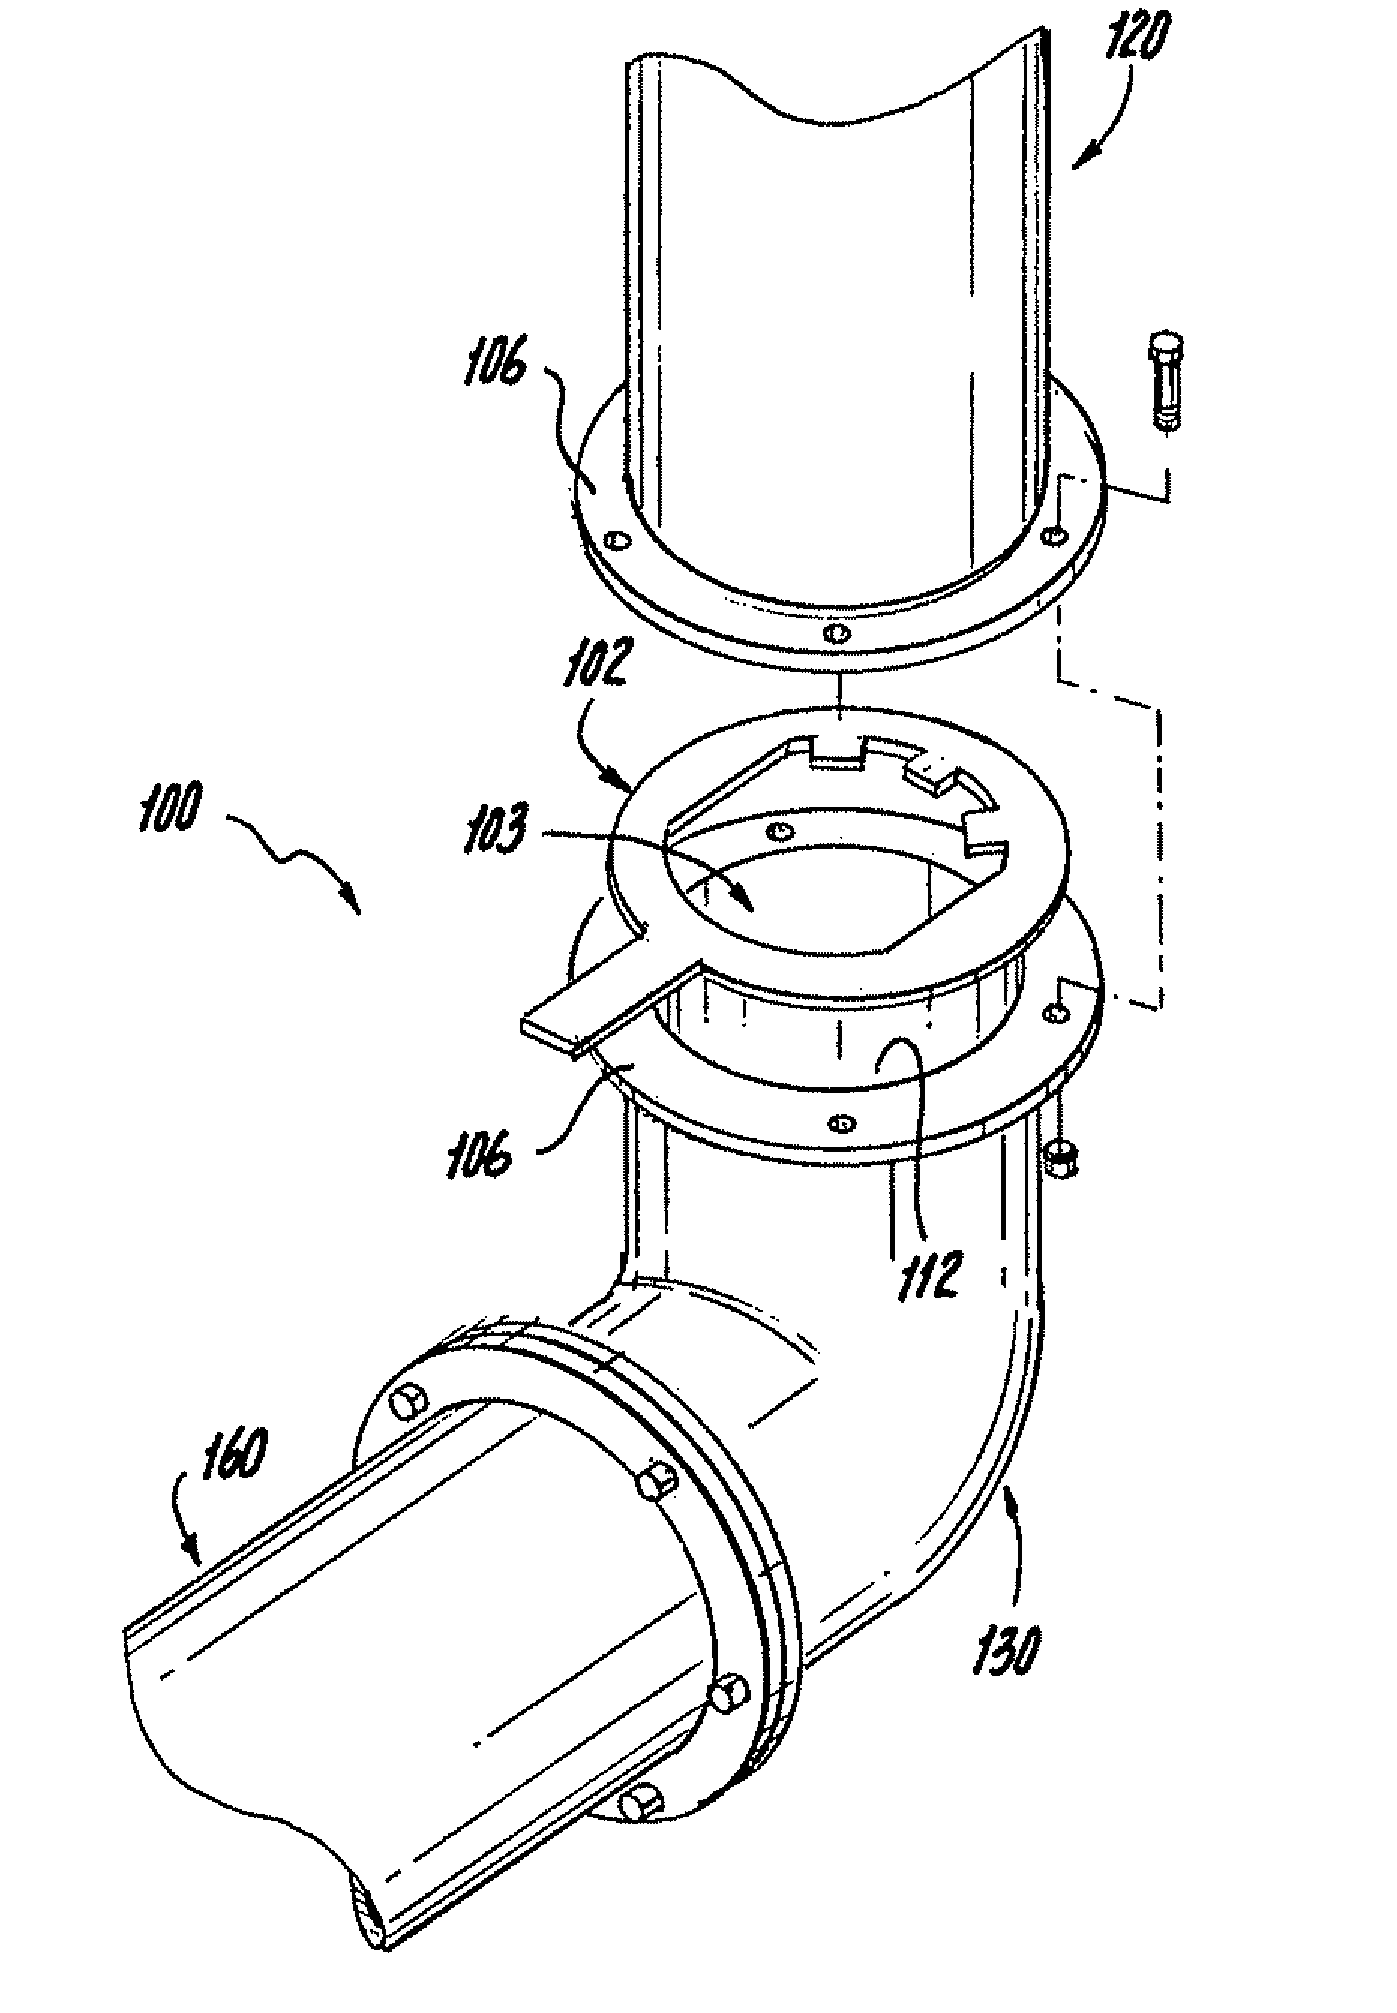 Anti-roping device for pulverized coal burners